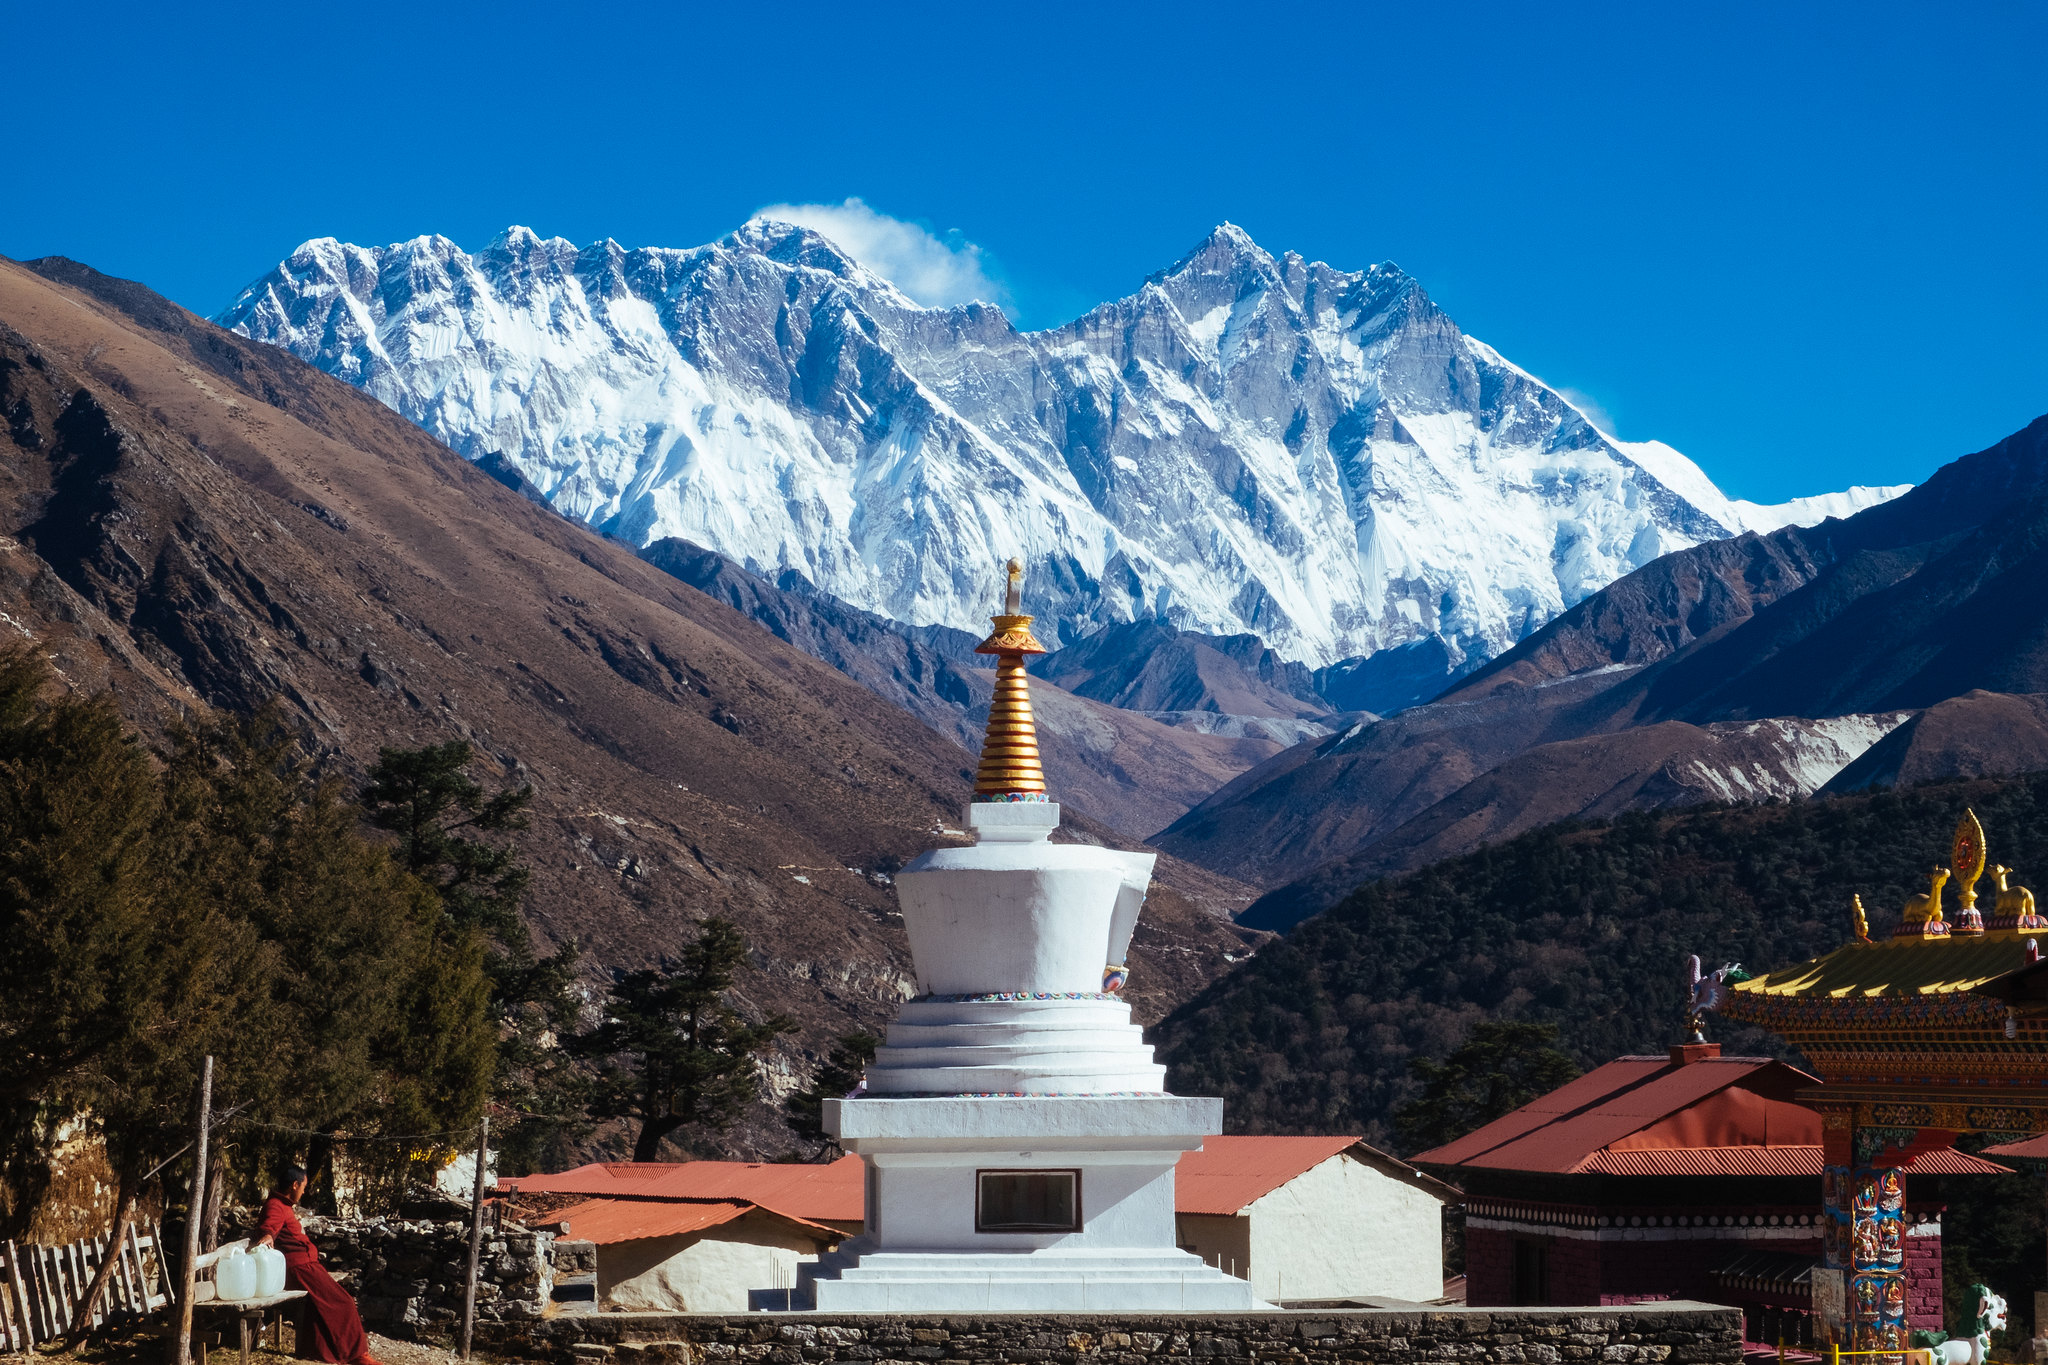 Nepal everest base camp trekTour Packages - Book honeymoon ,family,adventure tour packages to Nepal everest base camp trek|Travel Knits